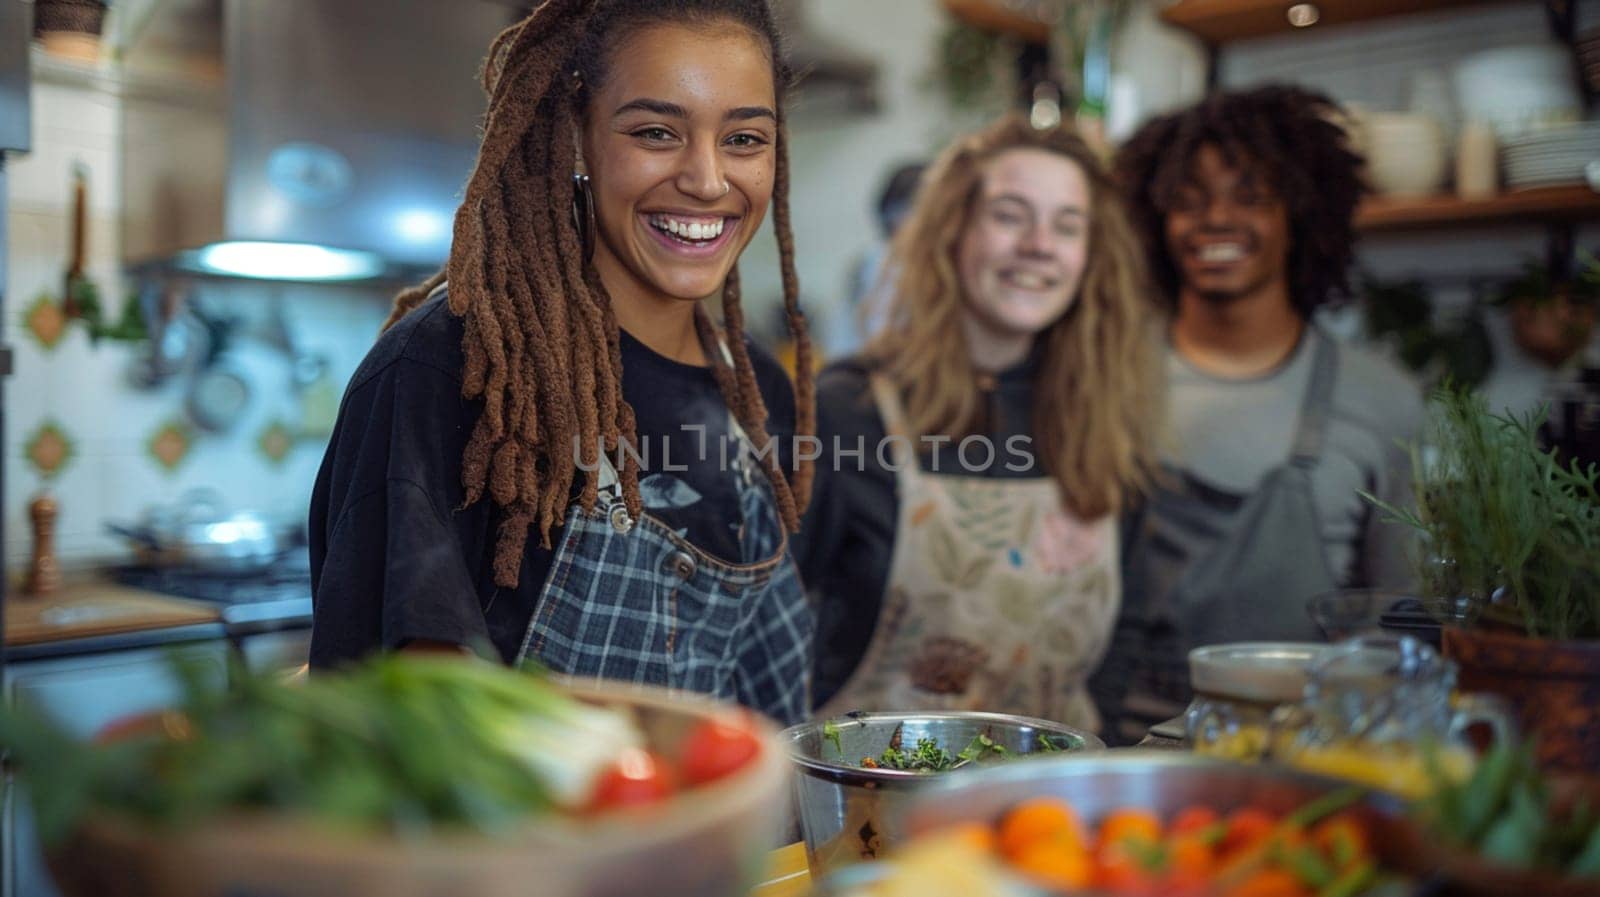 Three diverse mixed race vegan friends are smiling and laughing while preparing food in a kitchen by verbano